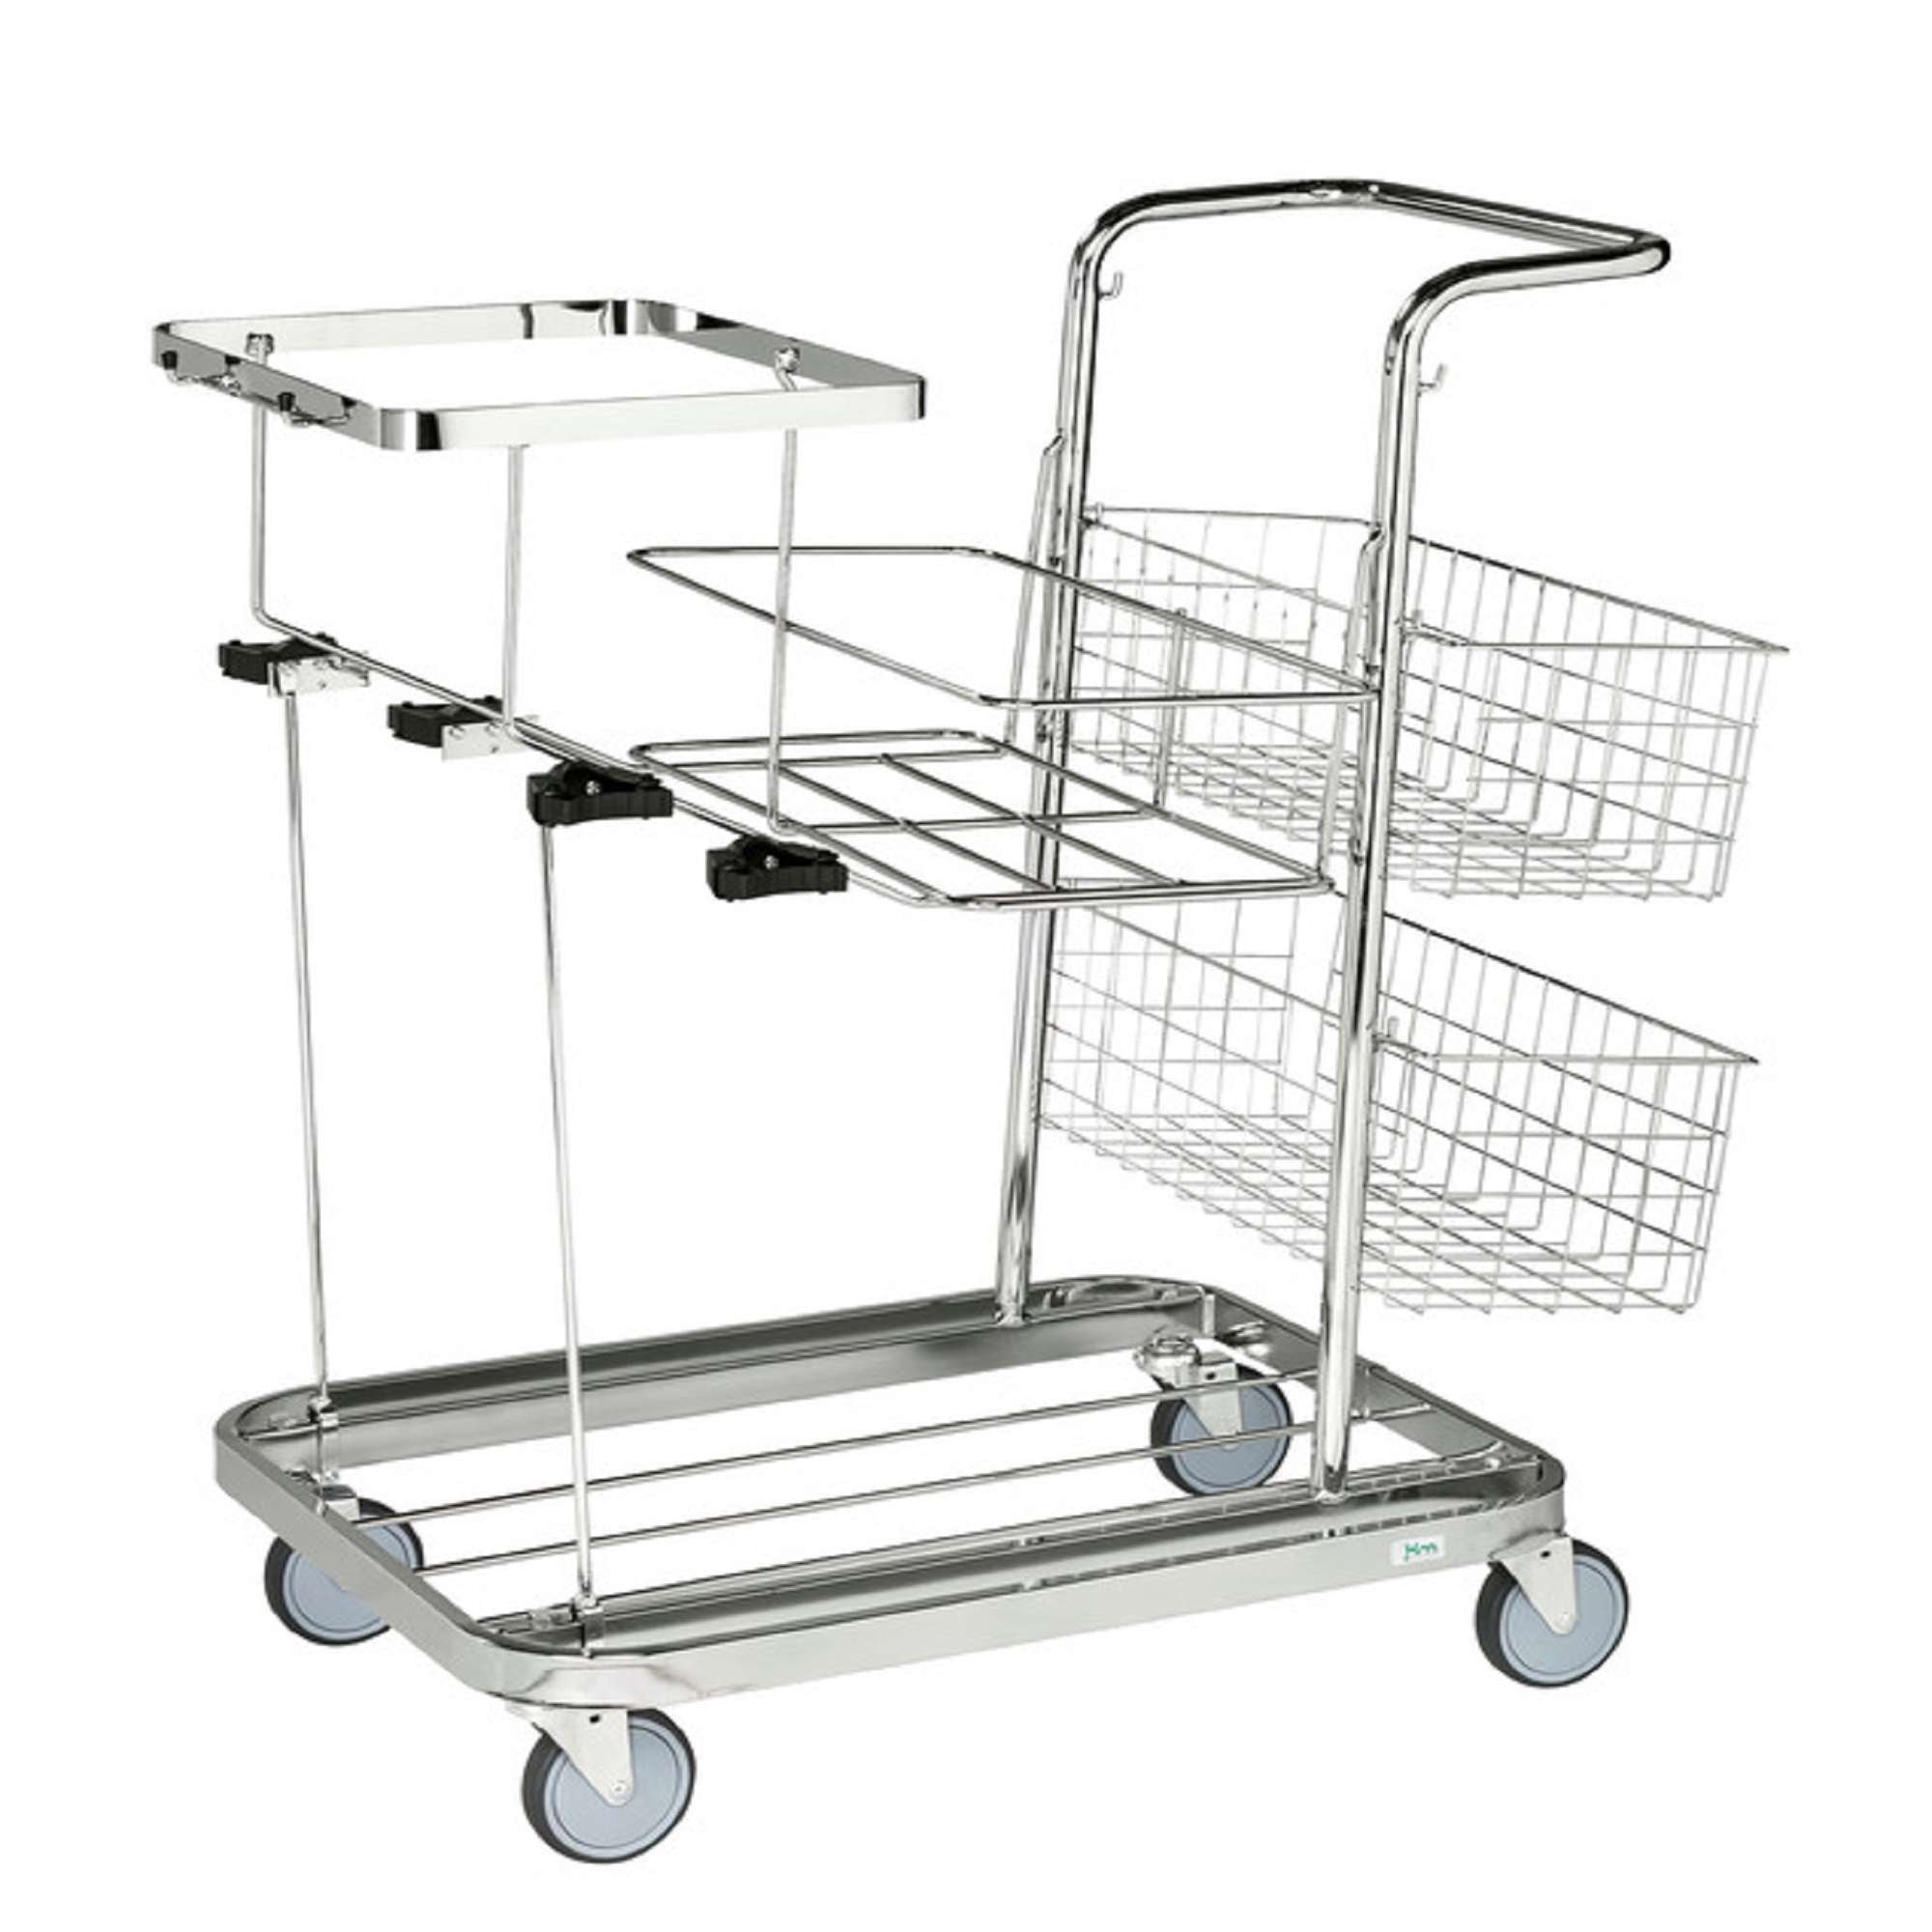 Easy managed and flexible cleaning trolley, L700 x B550 x H1000 mm - Kongamek